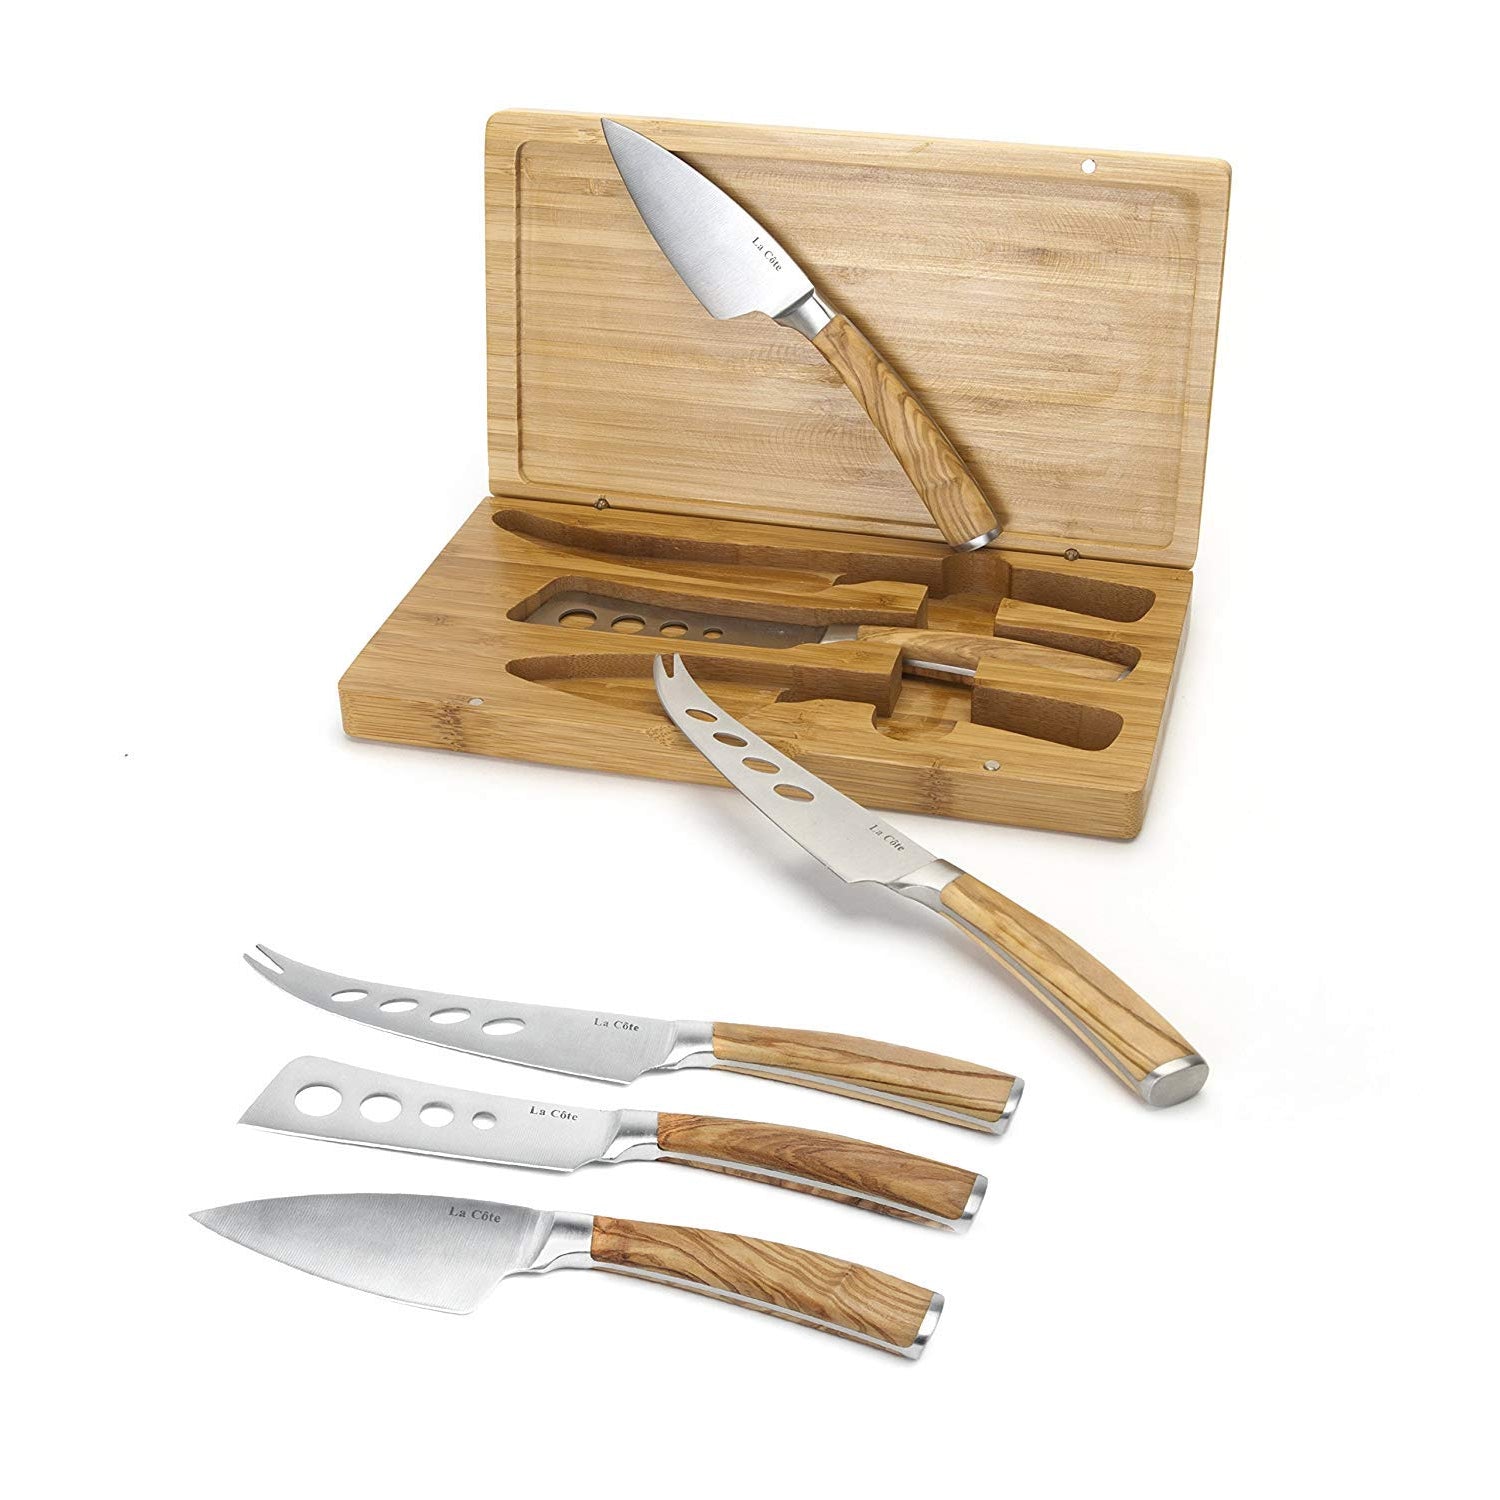 La Cote Olive Wood Cheese Knives Set Servers Accessories (3 Piece Cheese Knife Set In Bamboo box)